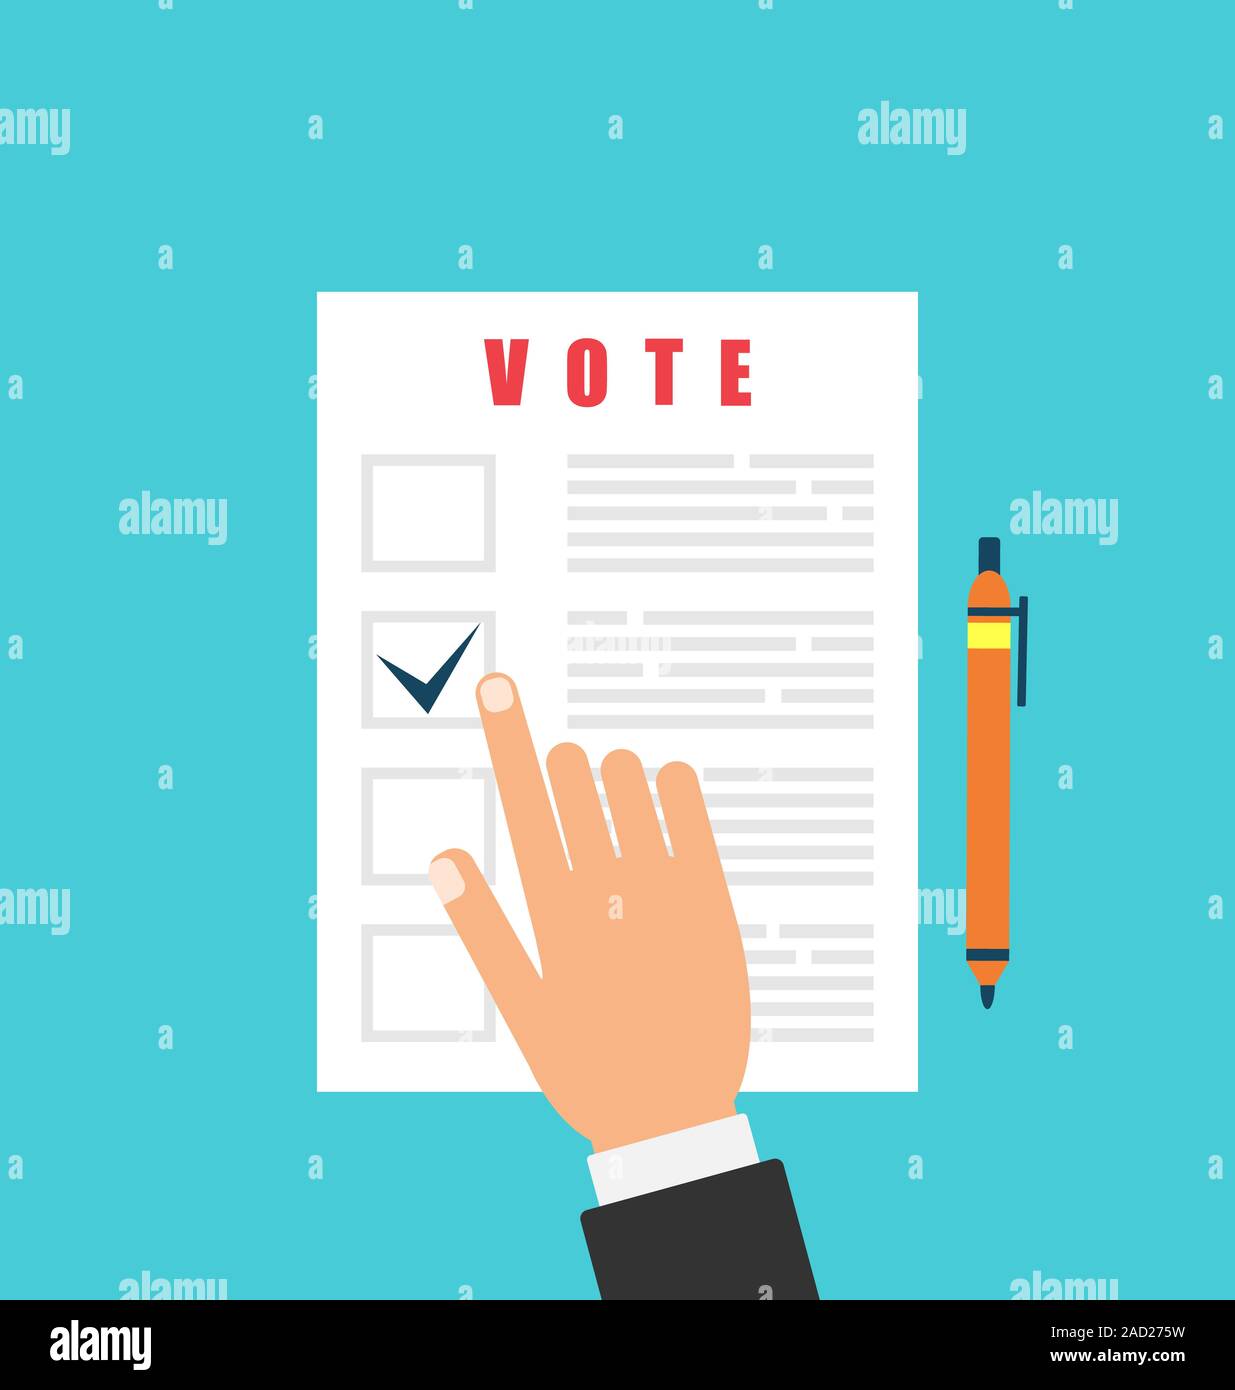 Human and Ballot Papers. Election and Voting Elements Stock Photo